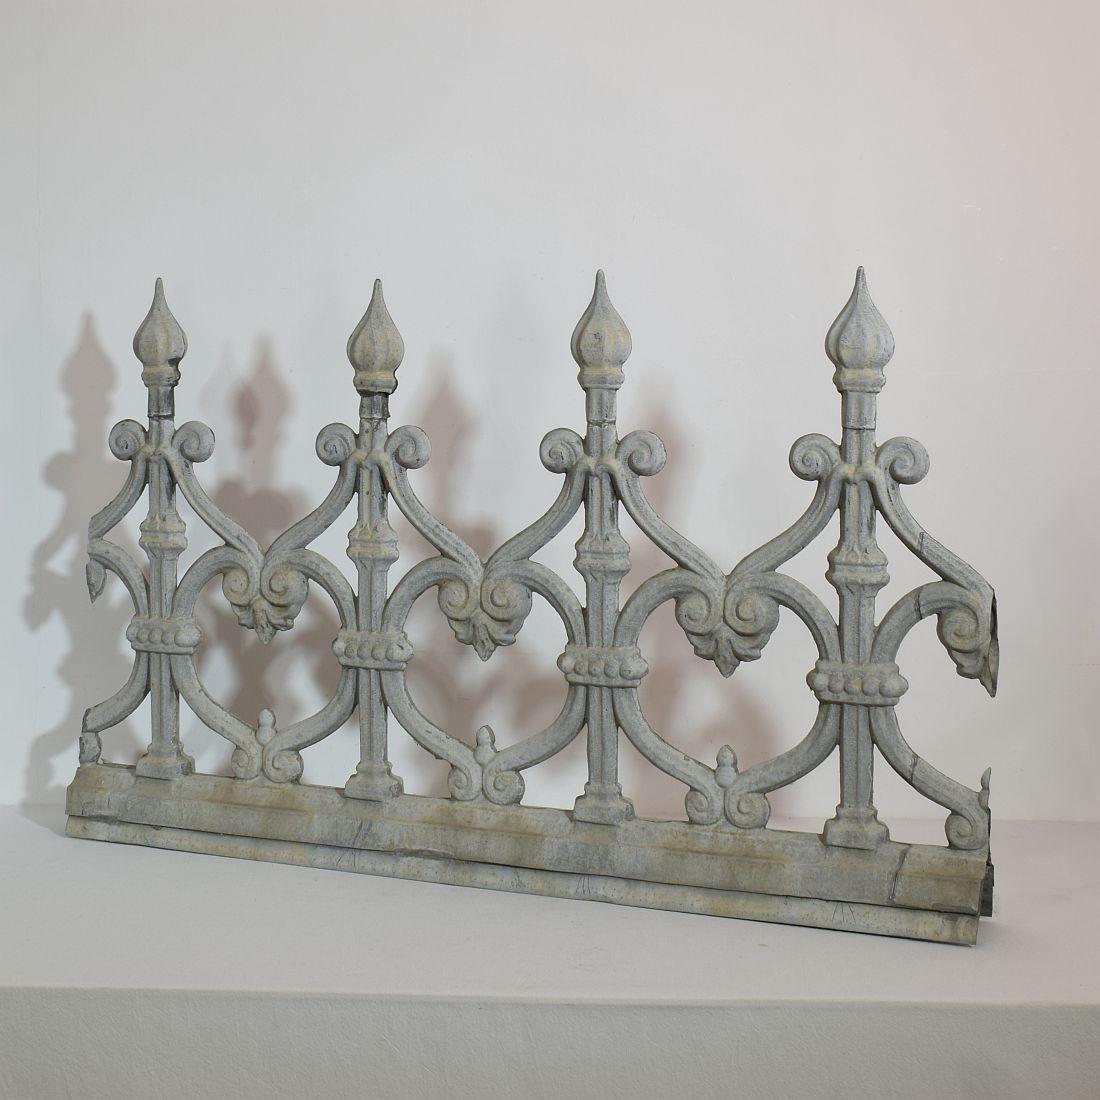 Pair of 19th Century French Zinc Architectural Roof Ornaments or Finials 7